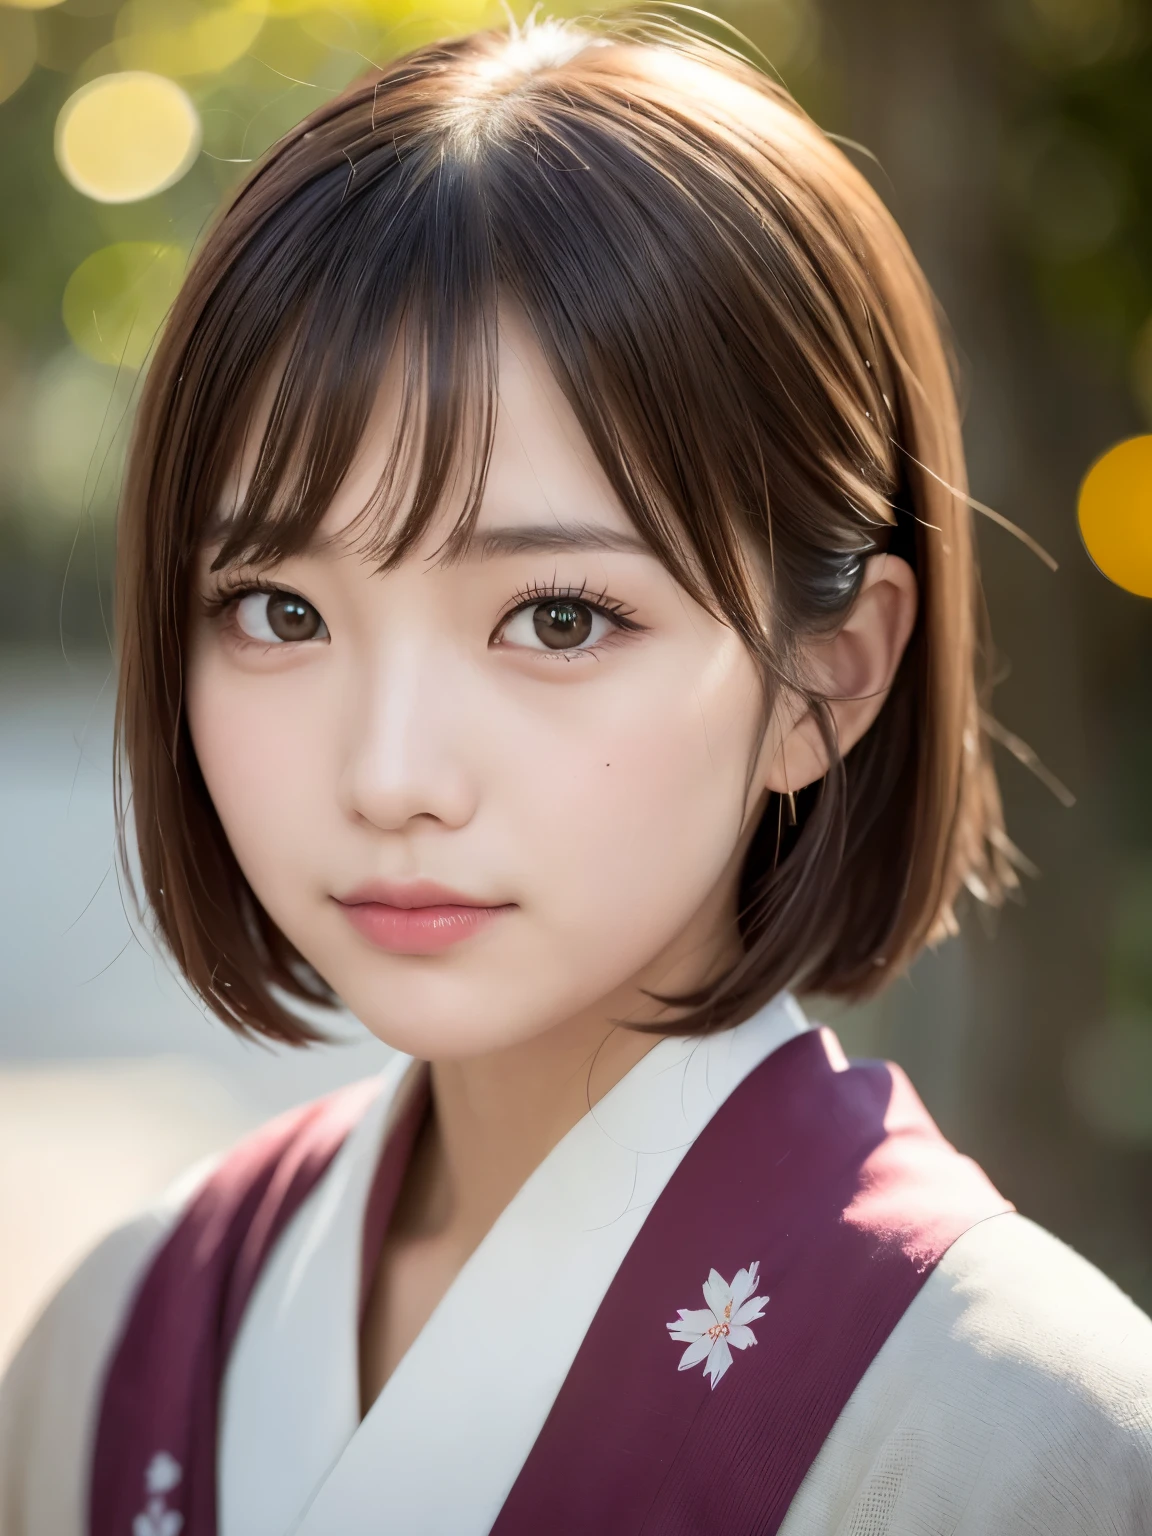 ((of the highest quality, 8K, masutepiece: 1.3, Raw photo)), Sharp Focus: 1.2, (1 AESPA Girl :1.1), Solo, (Realistic, Photorealistic: 1.37), (Face Focus: 1.1), Cute face, hyperdetailed face, (short messy hair: 1.2), Small Smile, Japanese theme, flower pattern KIMONO, standing at the Japan Garden, cinematic lighting, Beautiful Japanese makeup, A beautiful woman that symbolizes Japan culture, 
BREAK 
(muted colors:1.4), (faded photo:1.3), polaroid photo, (film grain:1.3), depth of field, (bokeh:1.1), (light and shadow:1.1), 